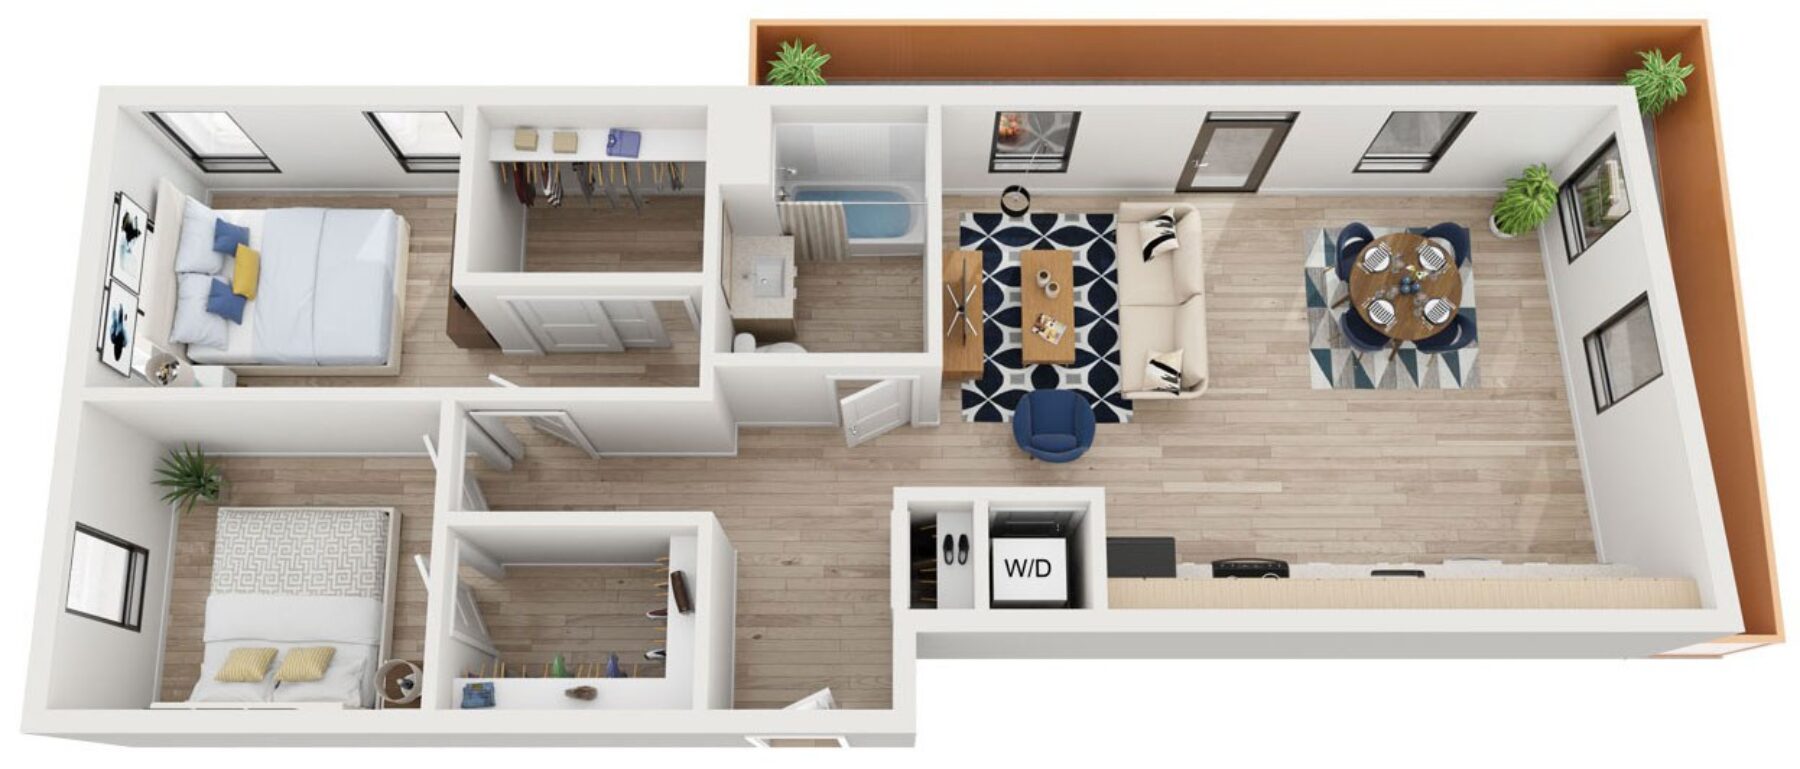 Plan Image: C4 - Two Bedroom